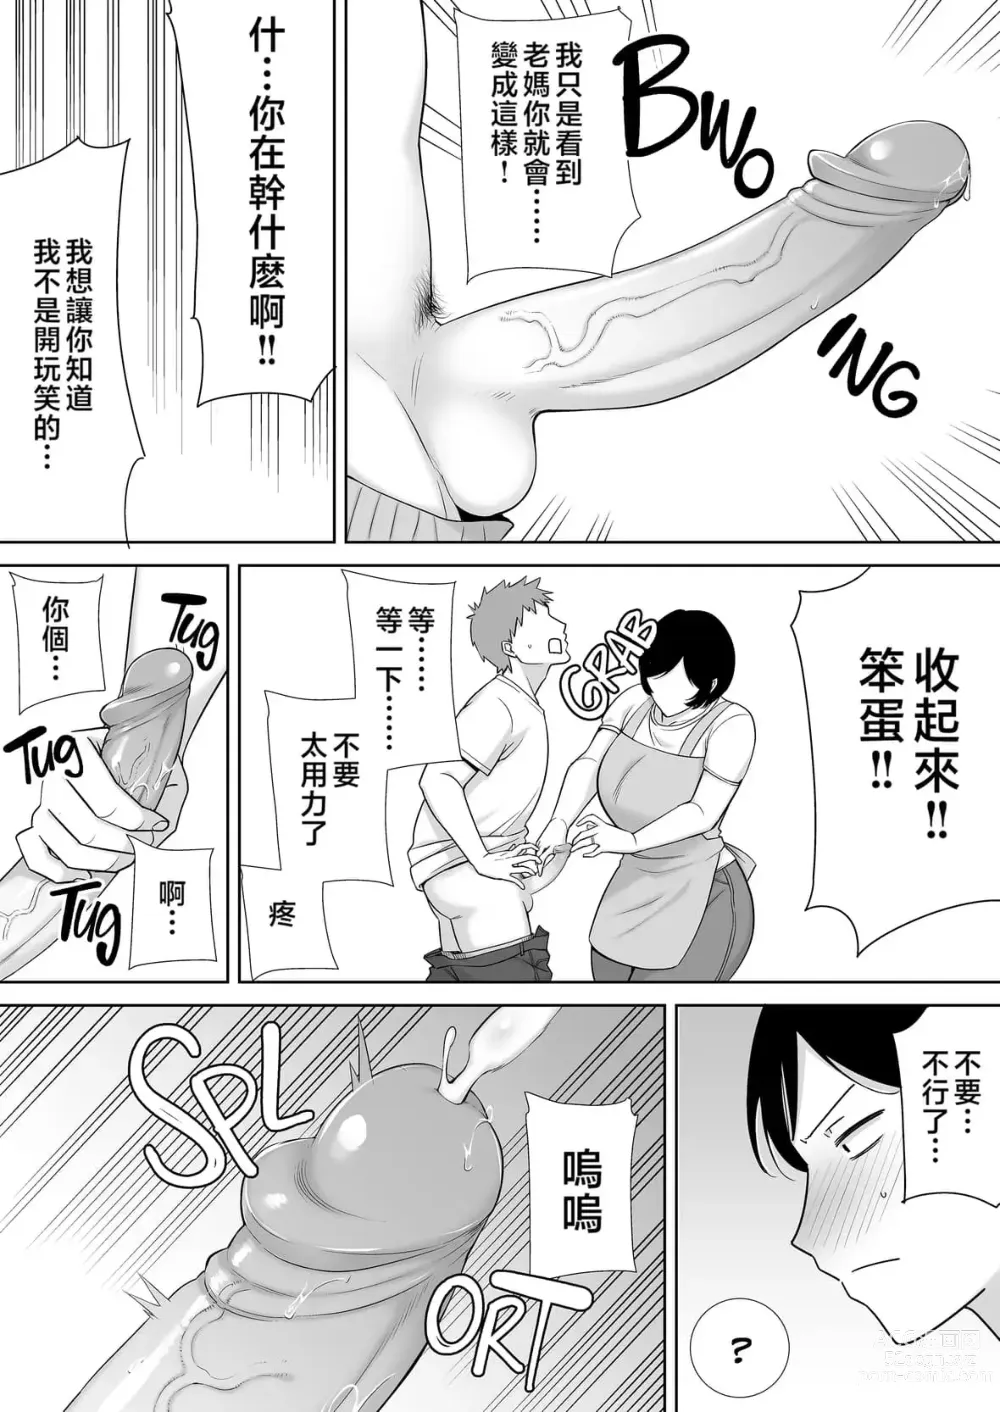 Page 5 of doujinshi even mom want a litle lovin